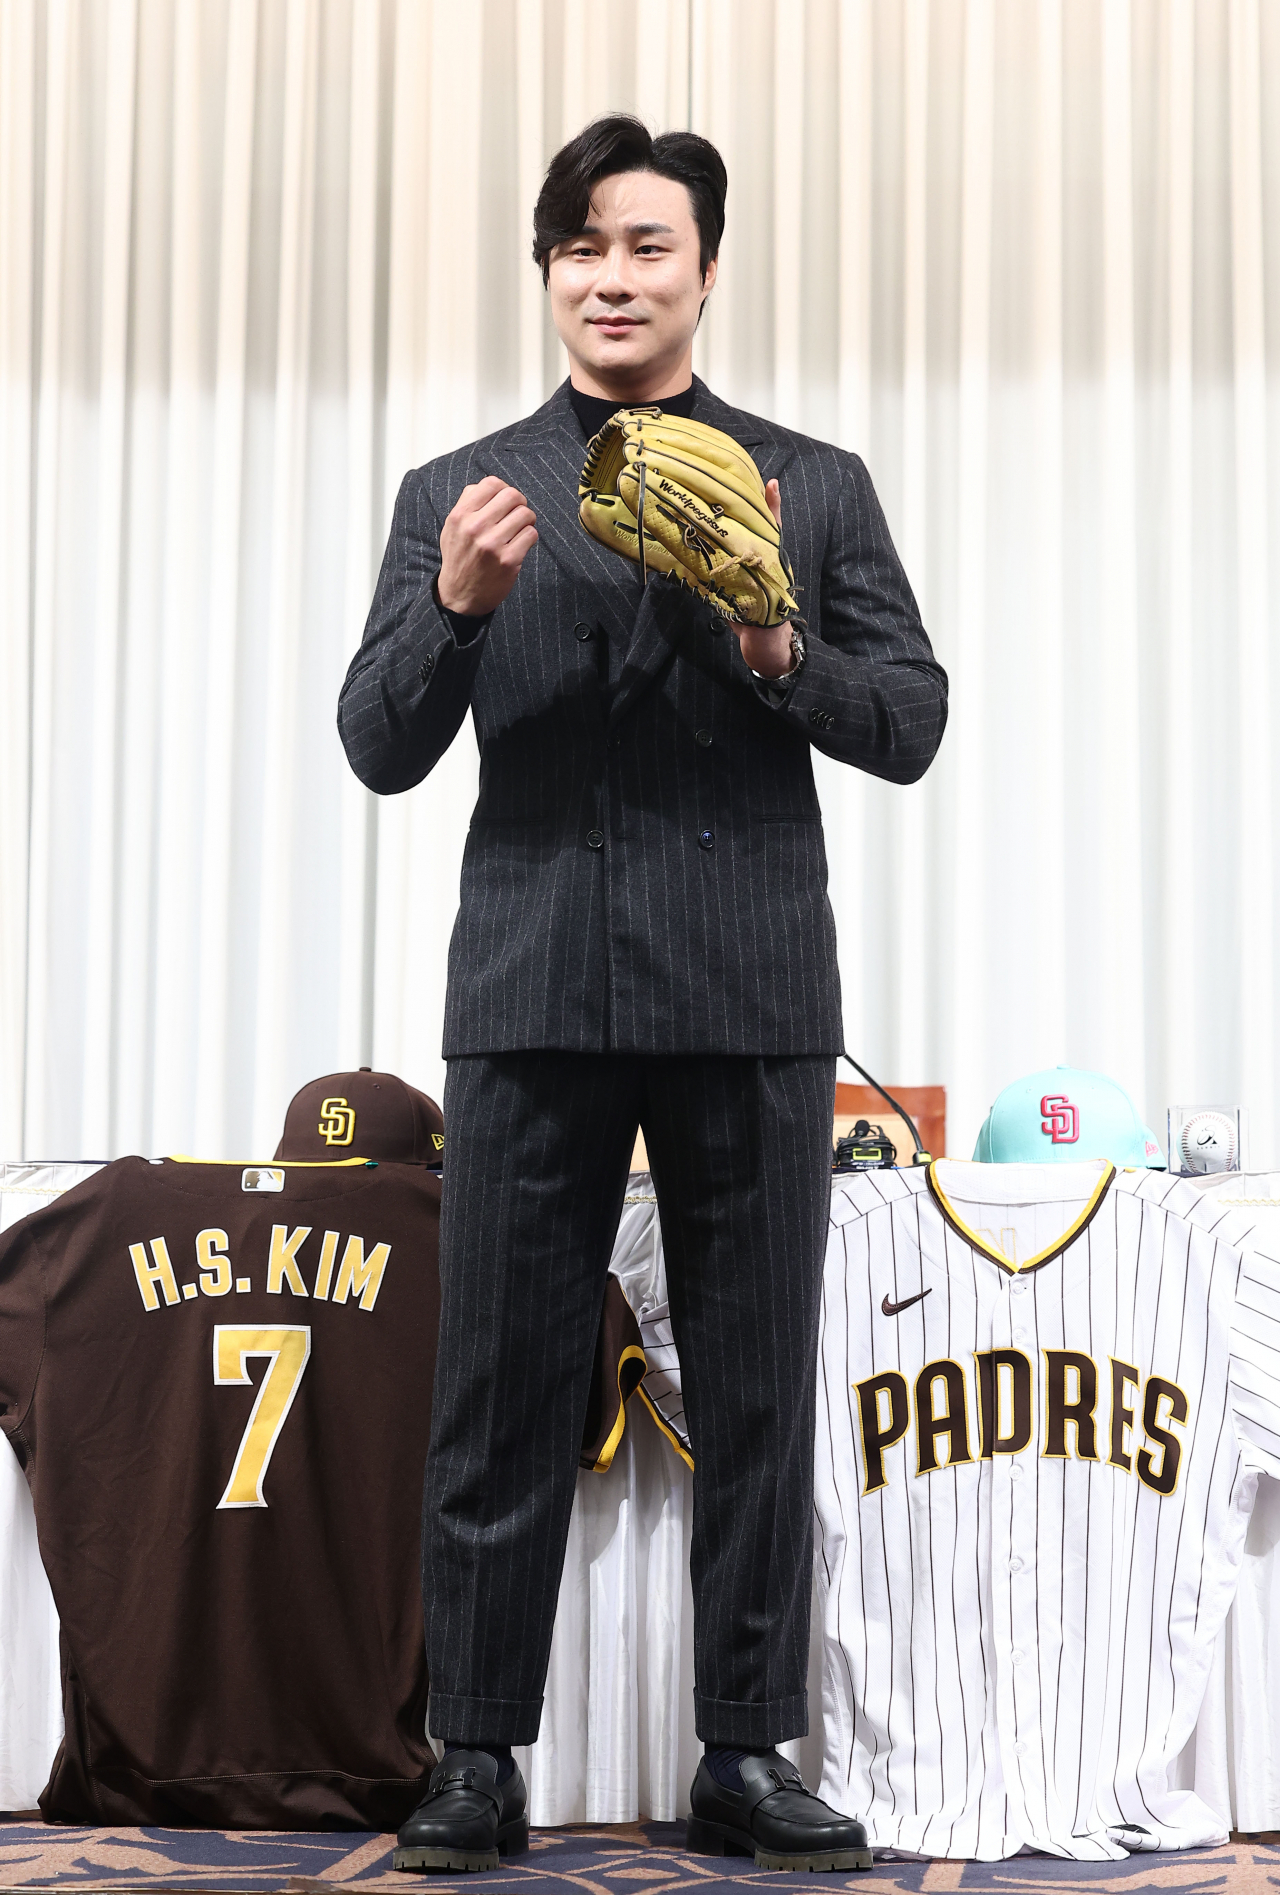 Kim Ha-seong poses for a photo during a press conference held on Nov.20 in Seoul. (Yonhap)